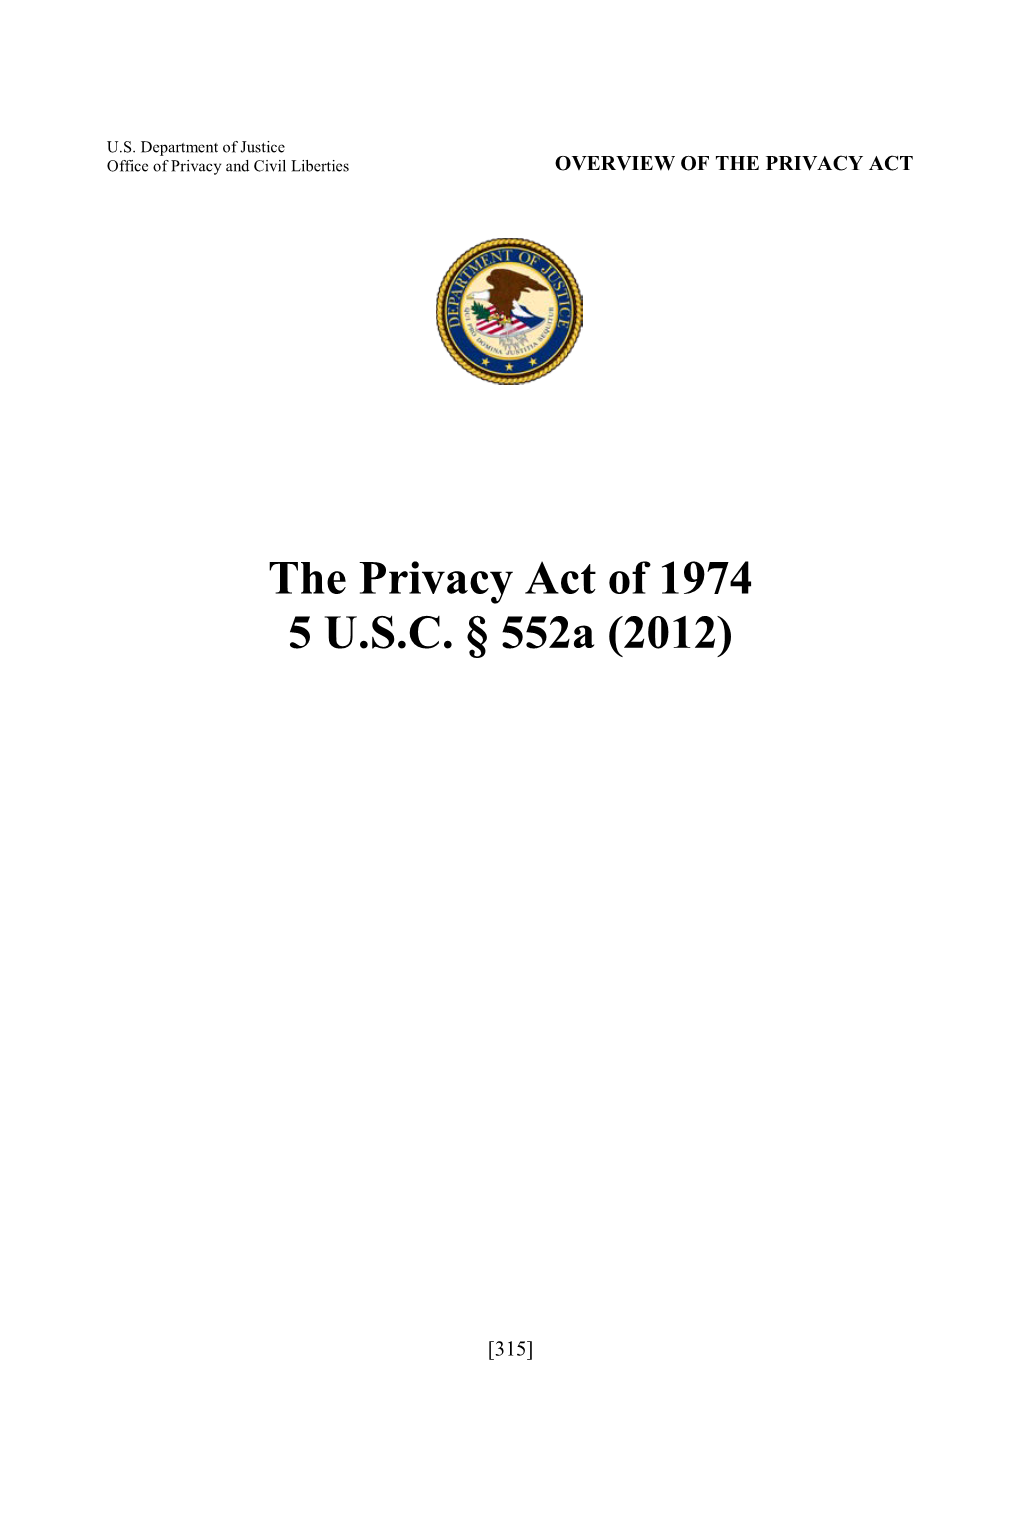 The Privacy Act of 1974 5 U.S.C. § 552A (2012)